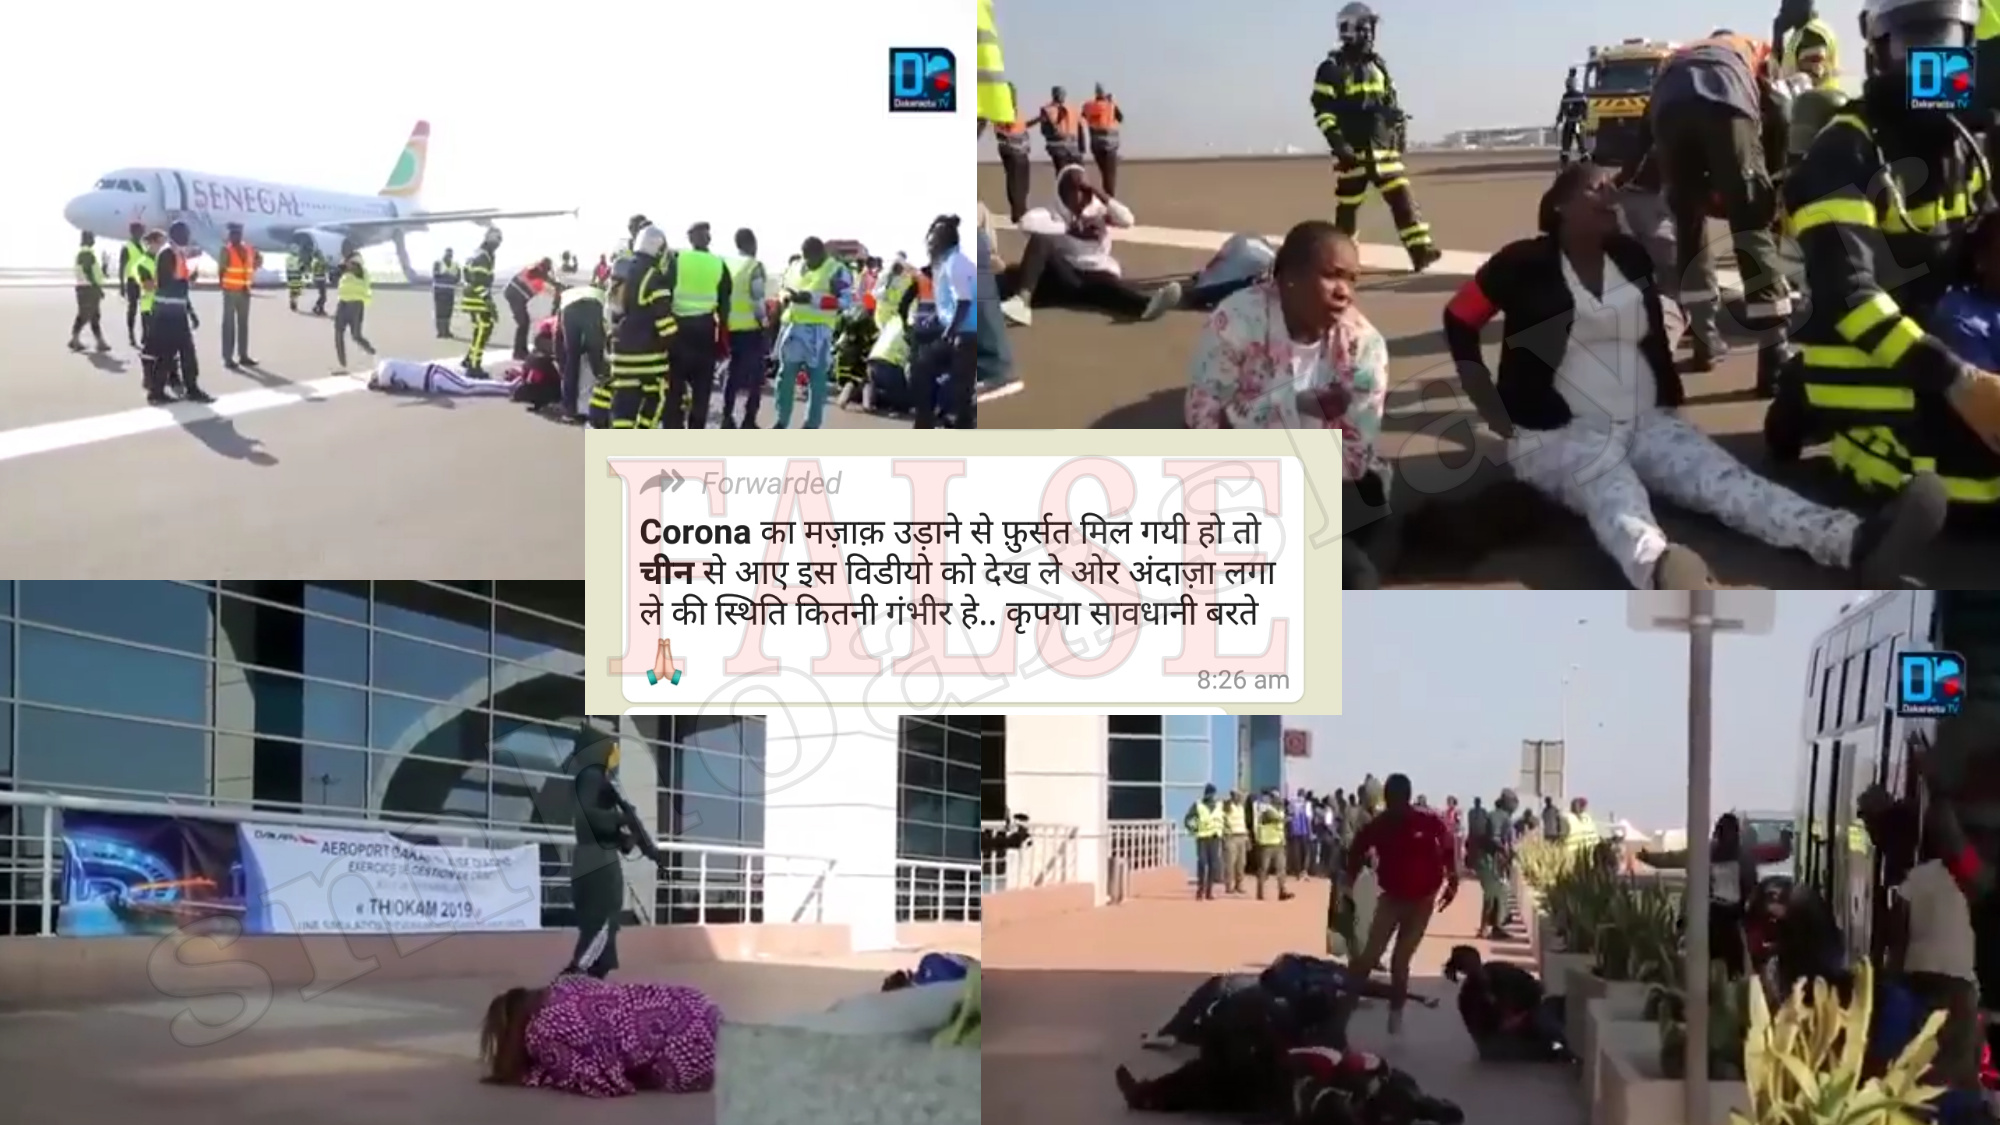 Last year's mock drill on Africa airport is viral as Corona effect in China now. - Swachh Social Media Abhiyaan